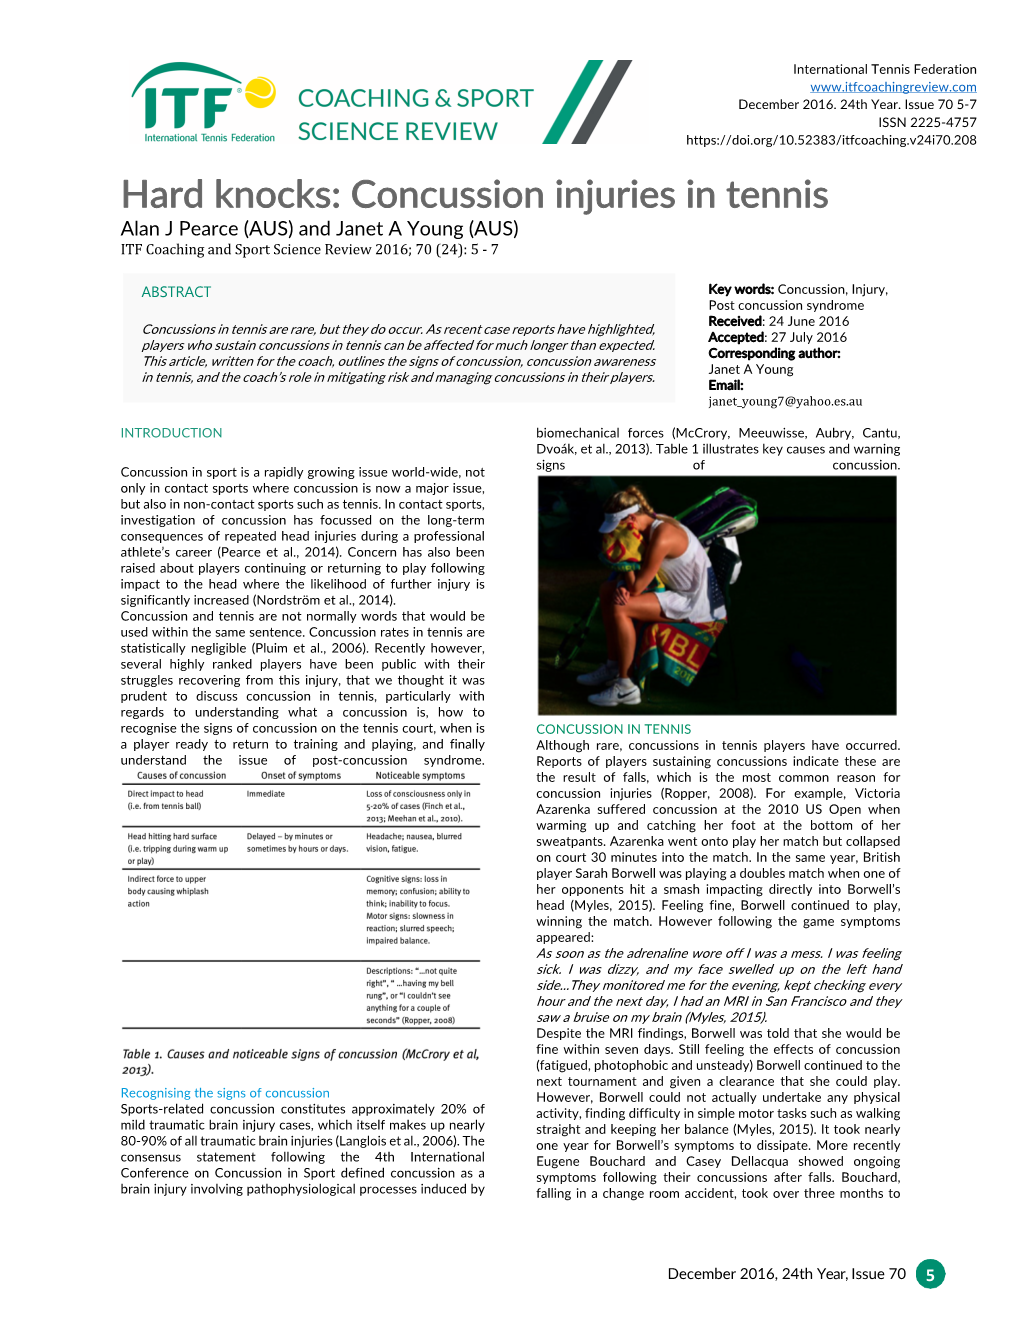 Hard Knocks: Concussion Injuries in Tennis Alan J Pearce (AUS) and Janet a Young (AUS) ITF Coaching and Sport Science Review 2016; 70 (24): 5 - 7